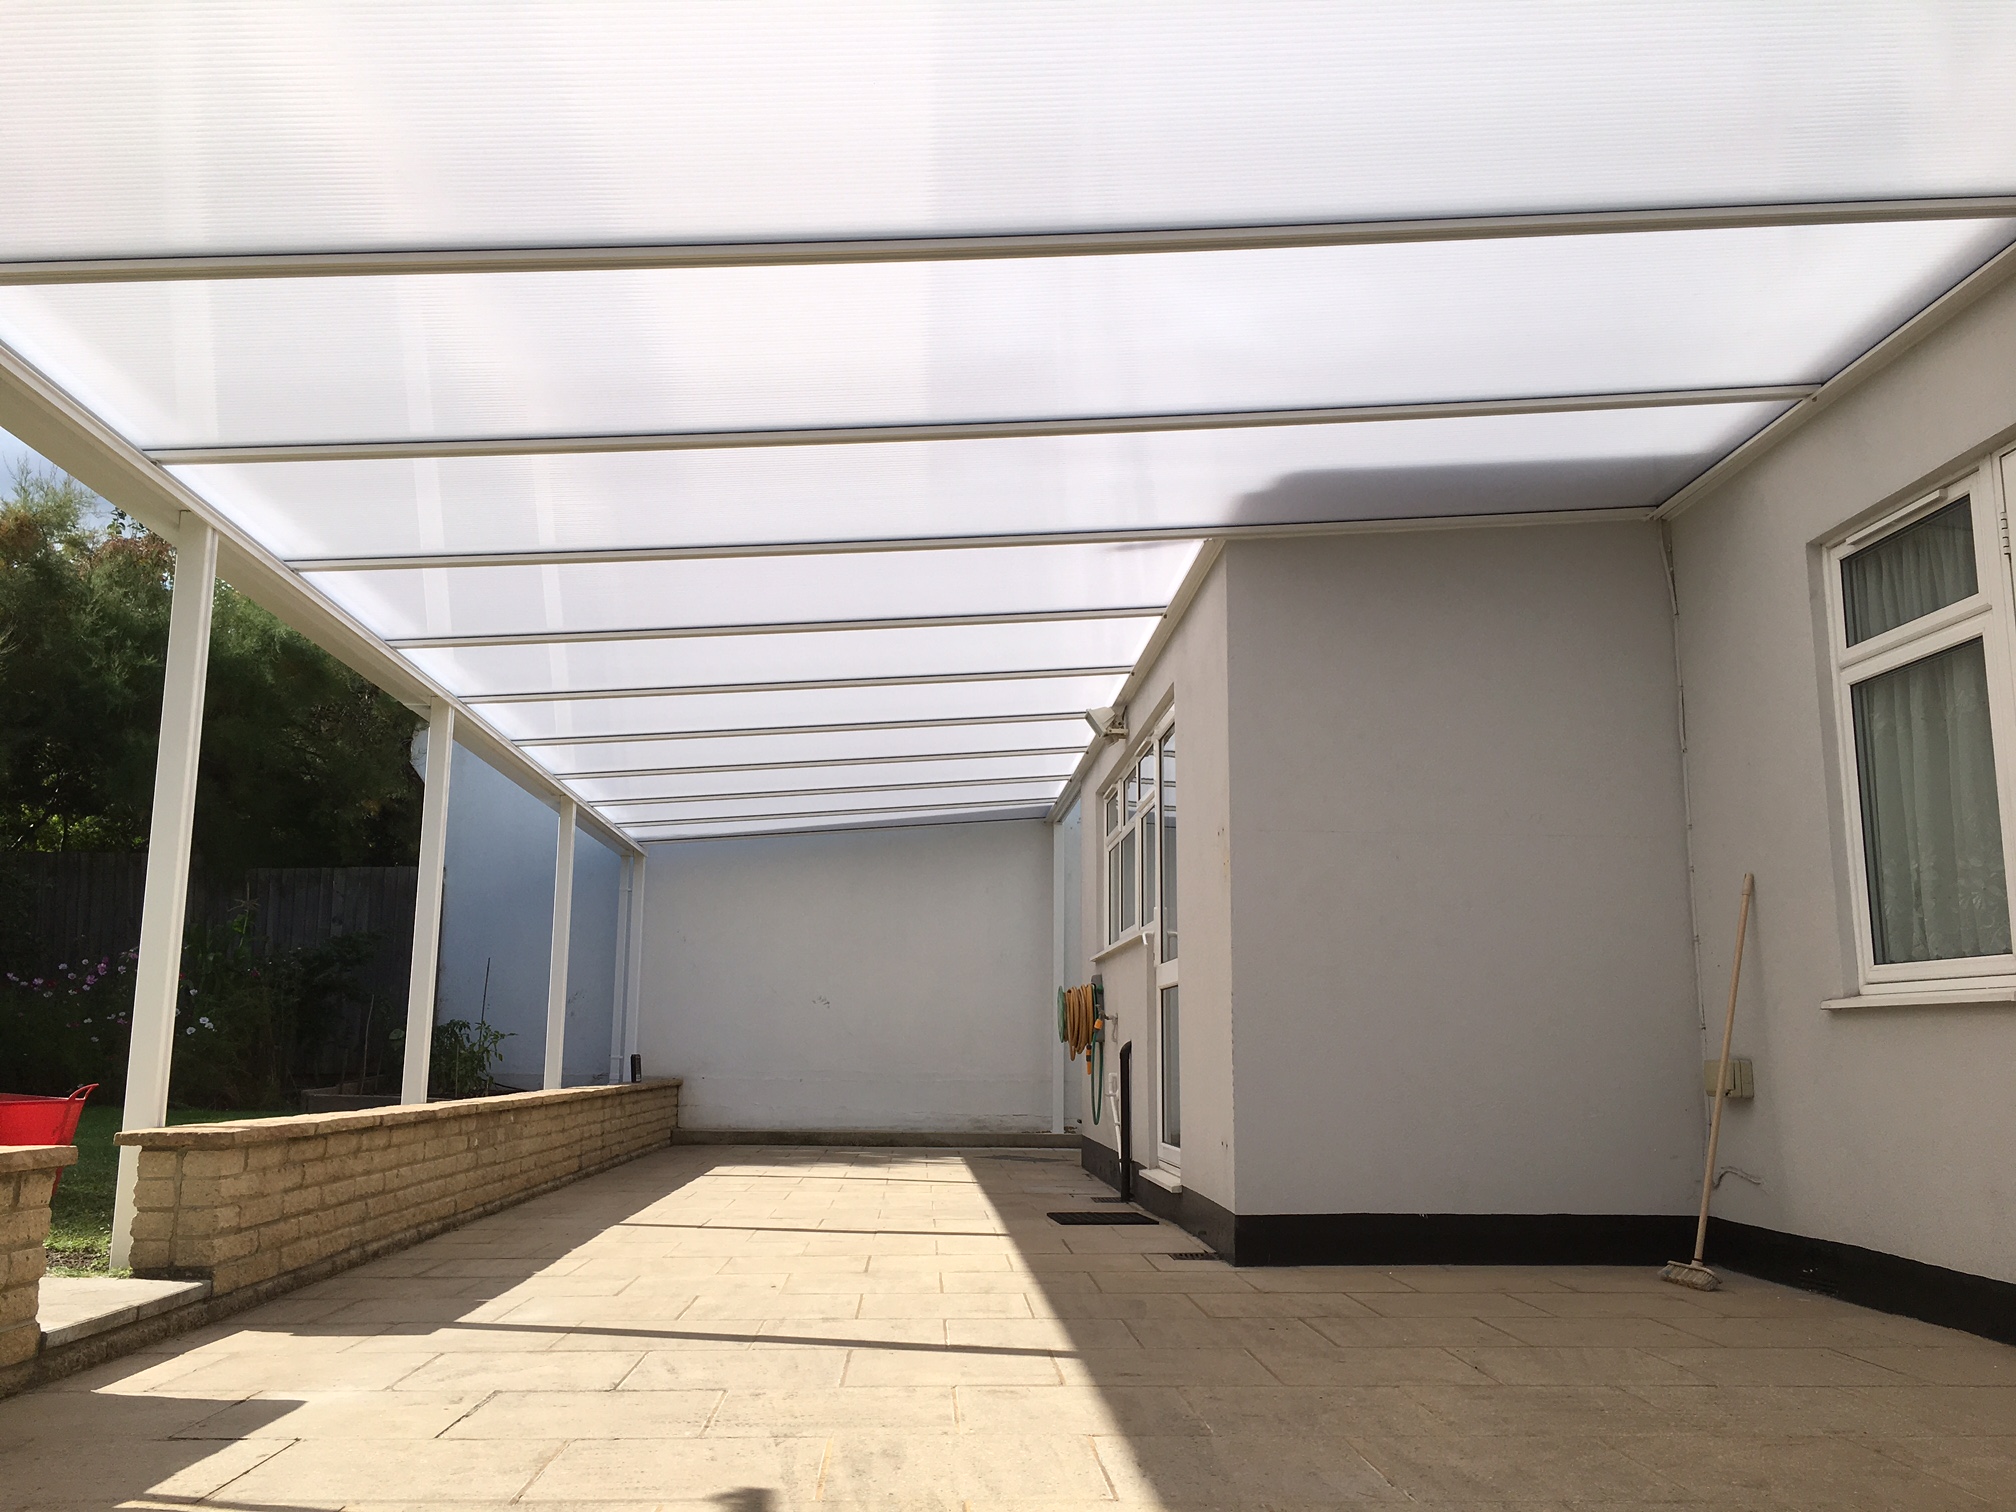 polycarbonate roof letting sunshine through but preventing full glare